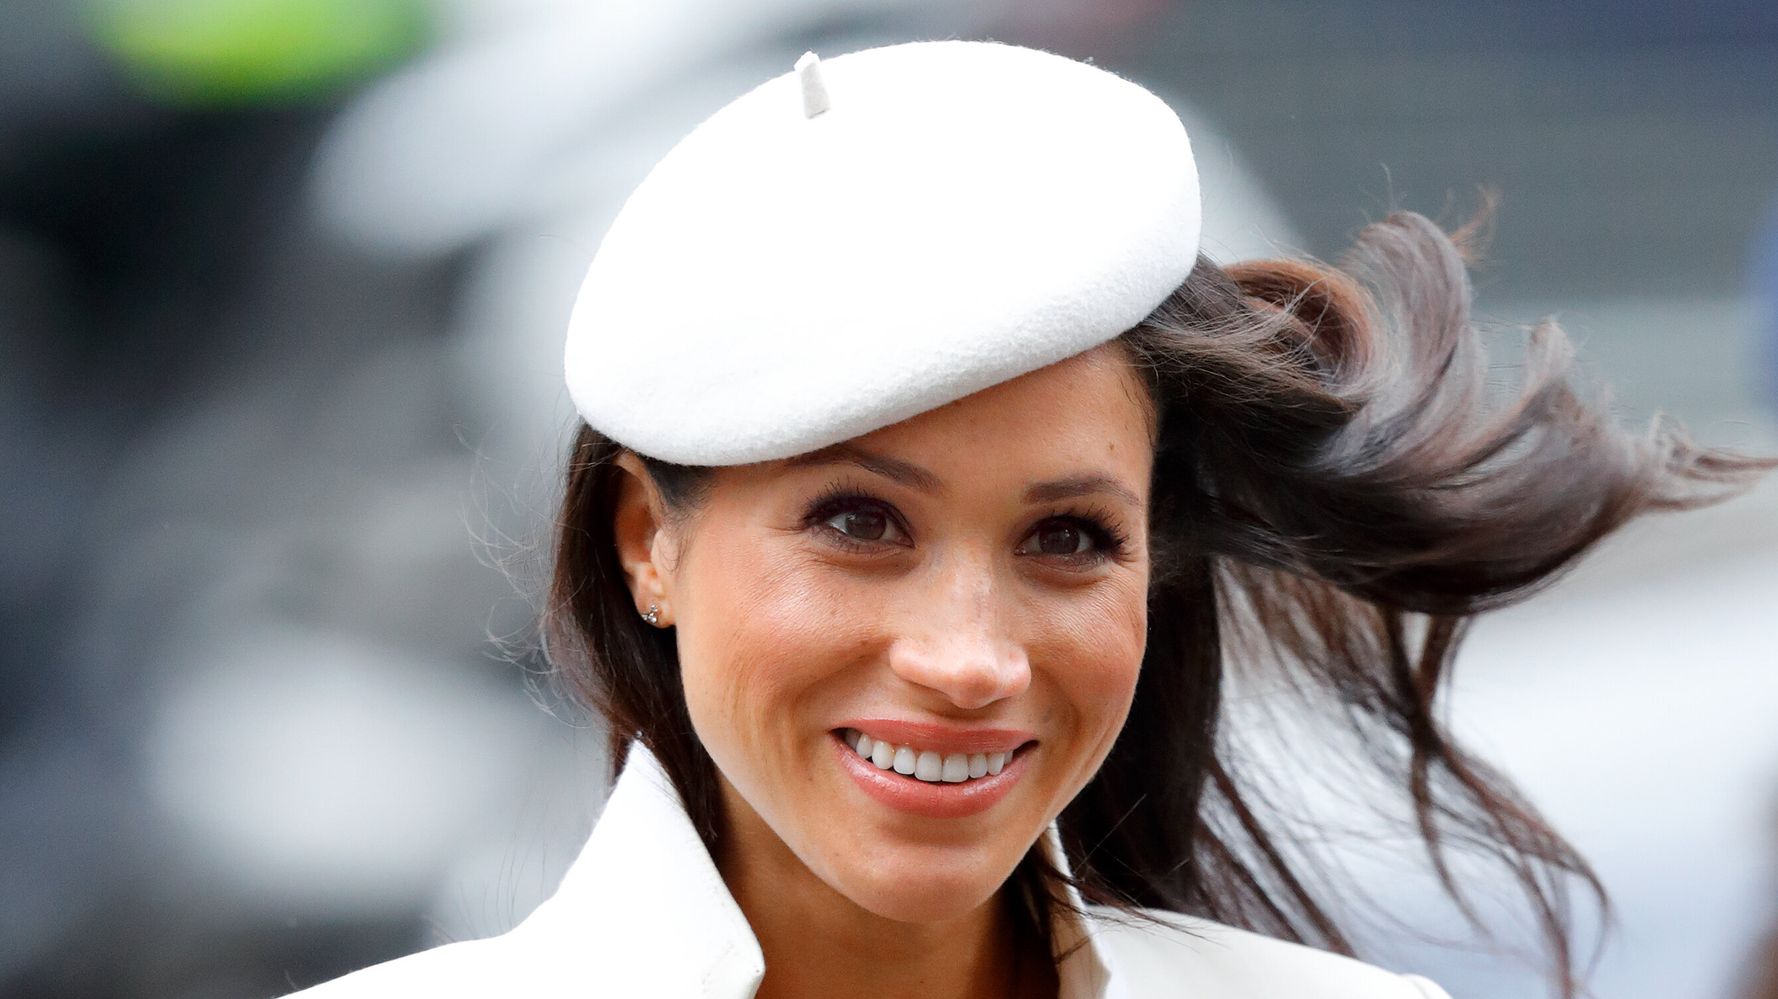 Meghan Markle Sends A Message To Supporters After 'The Bench' Hits #1